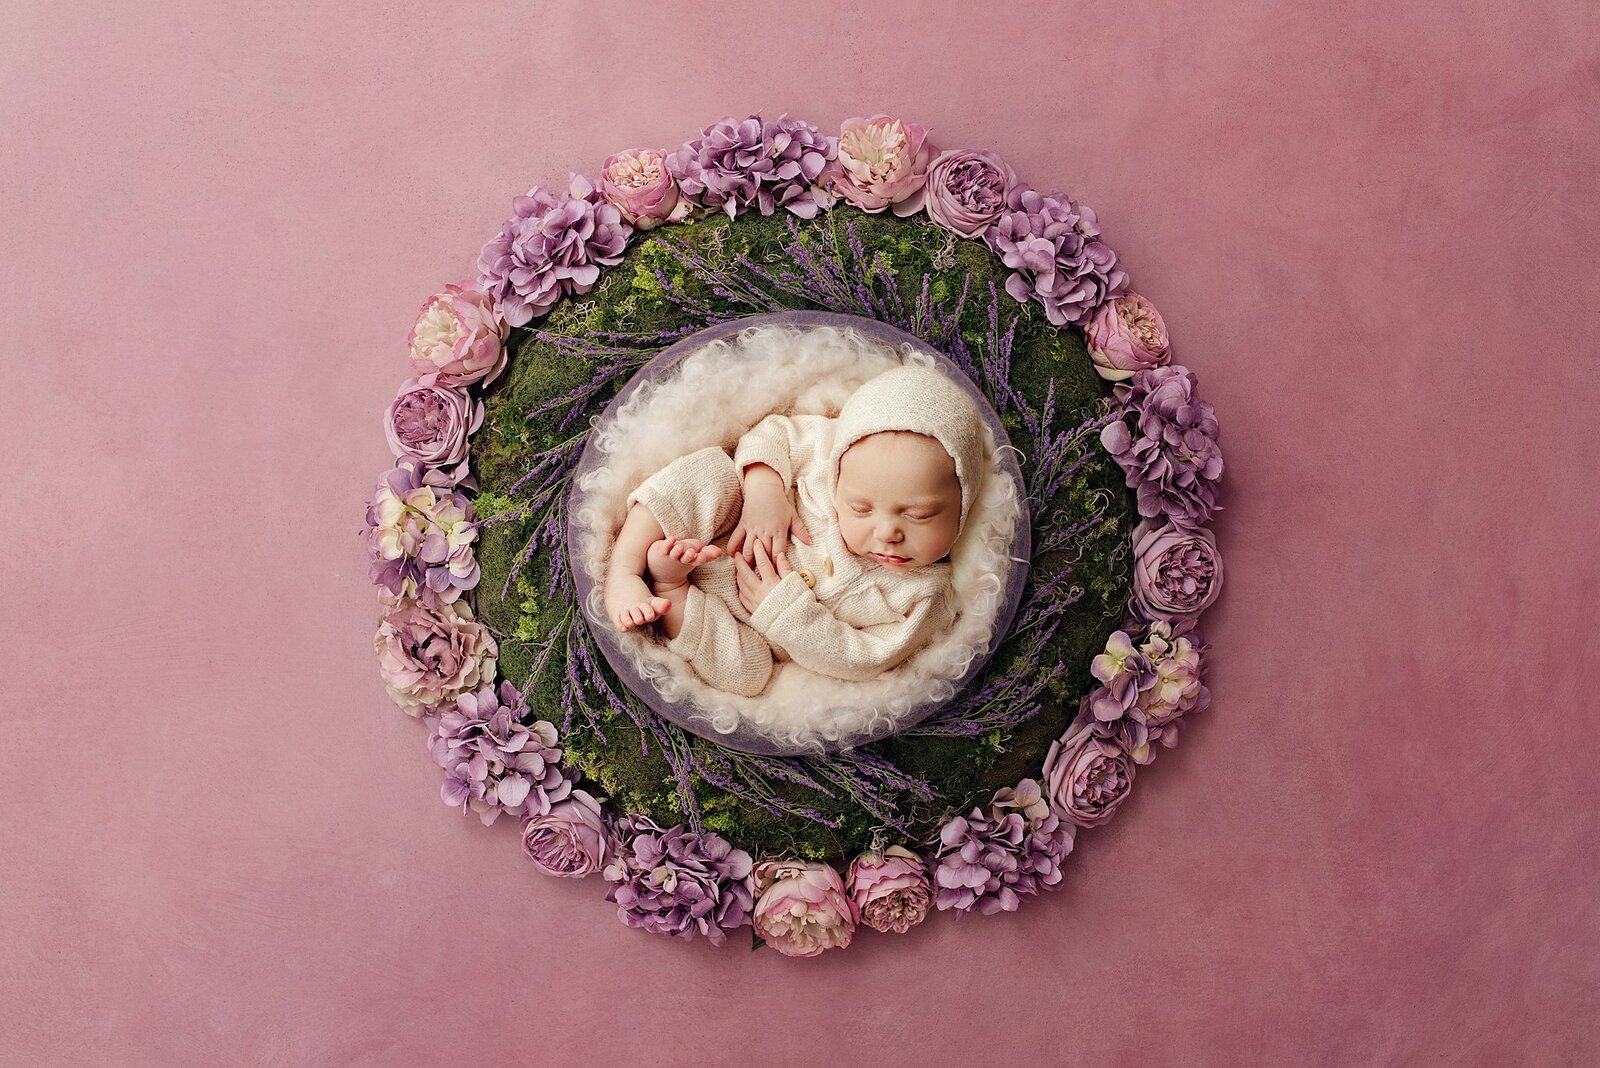 baby girl posed on a bowl with pink and purple glowers